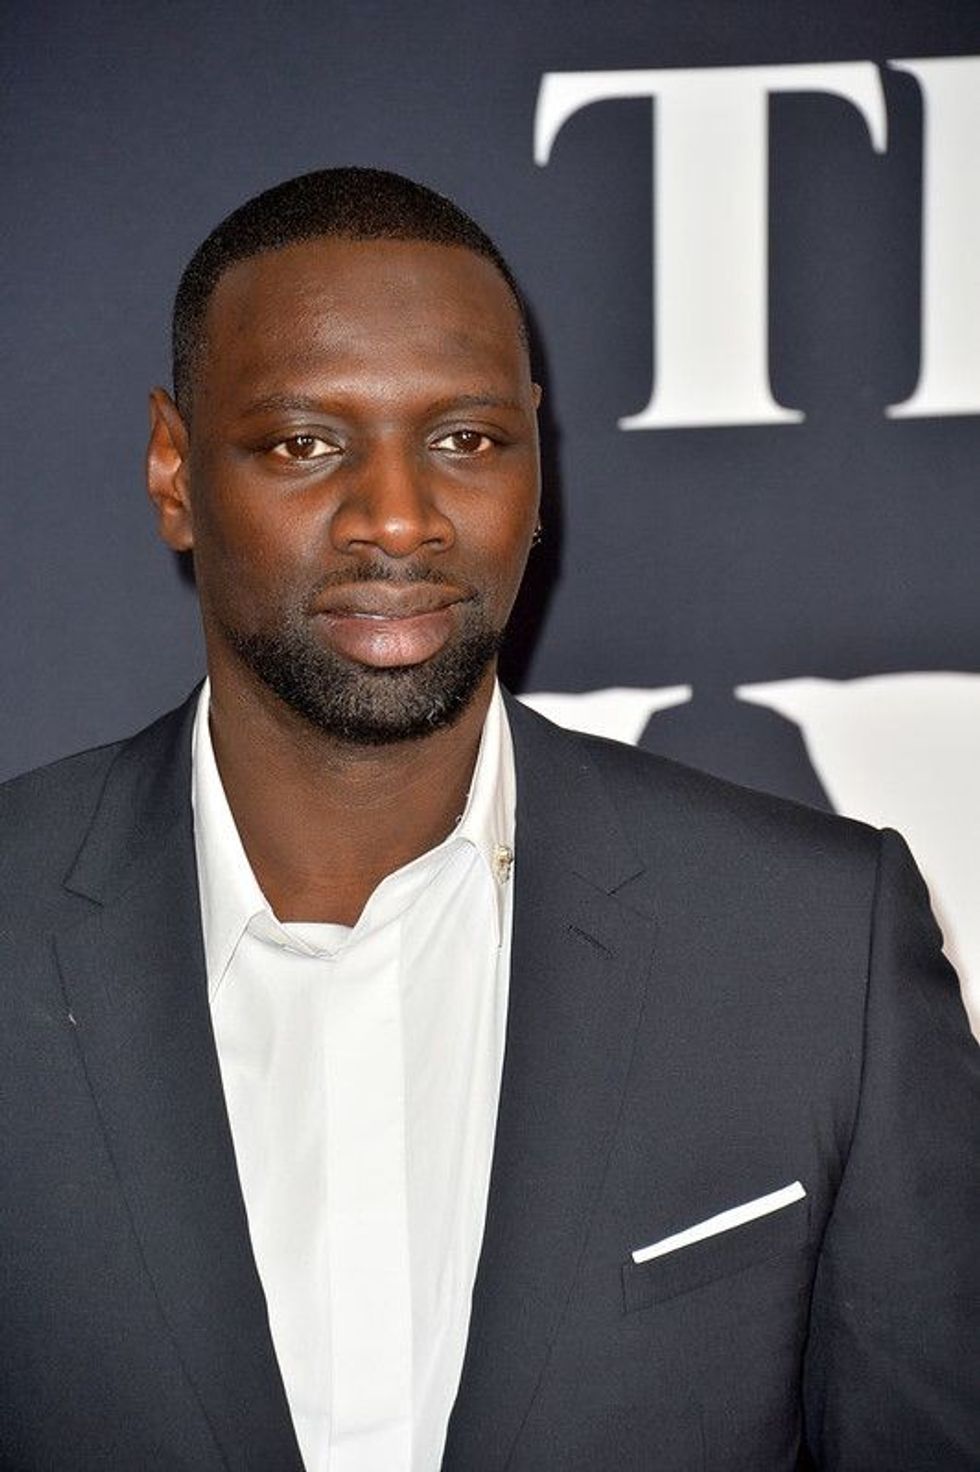 Omar Sy had starred in the comedy-drama 'The Intouchables'.